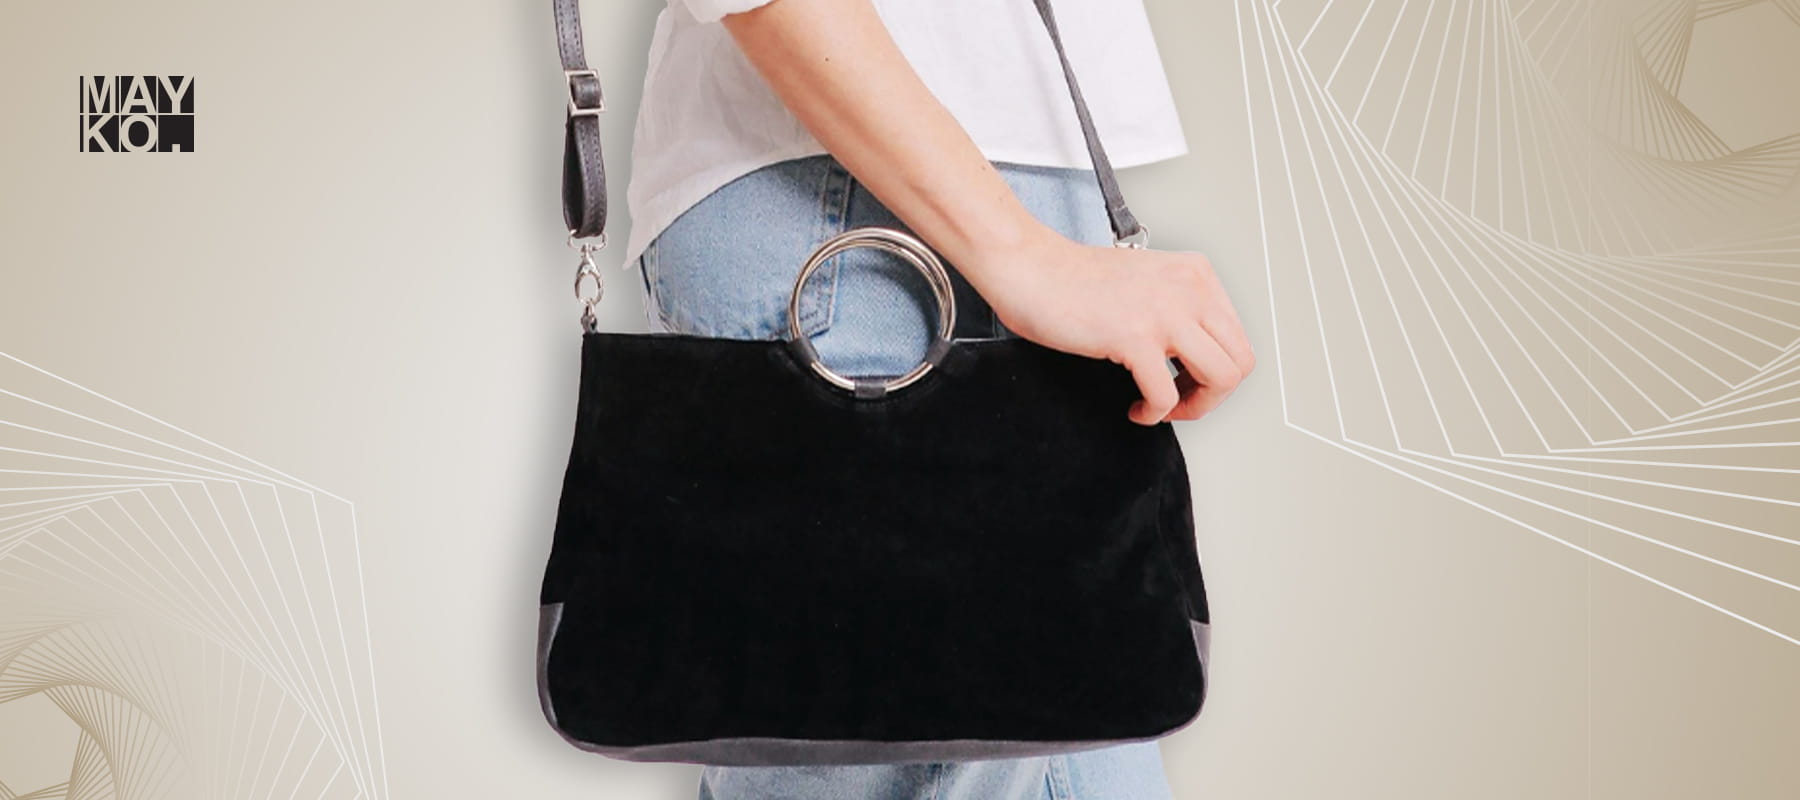 How To Choose The Best Black Leather Purse For Your Look